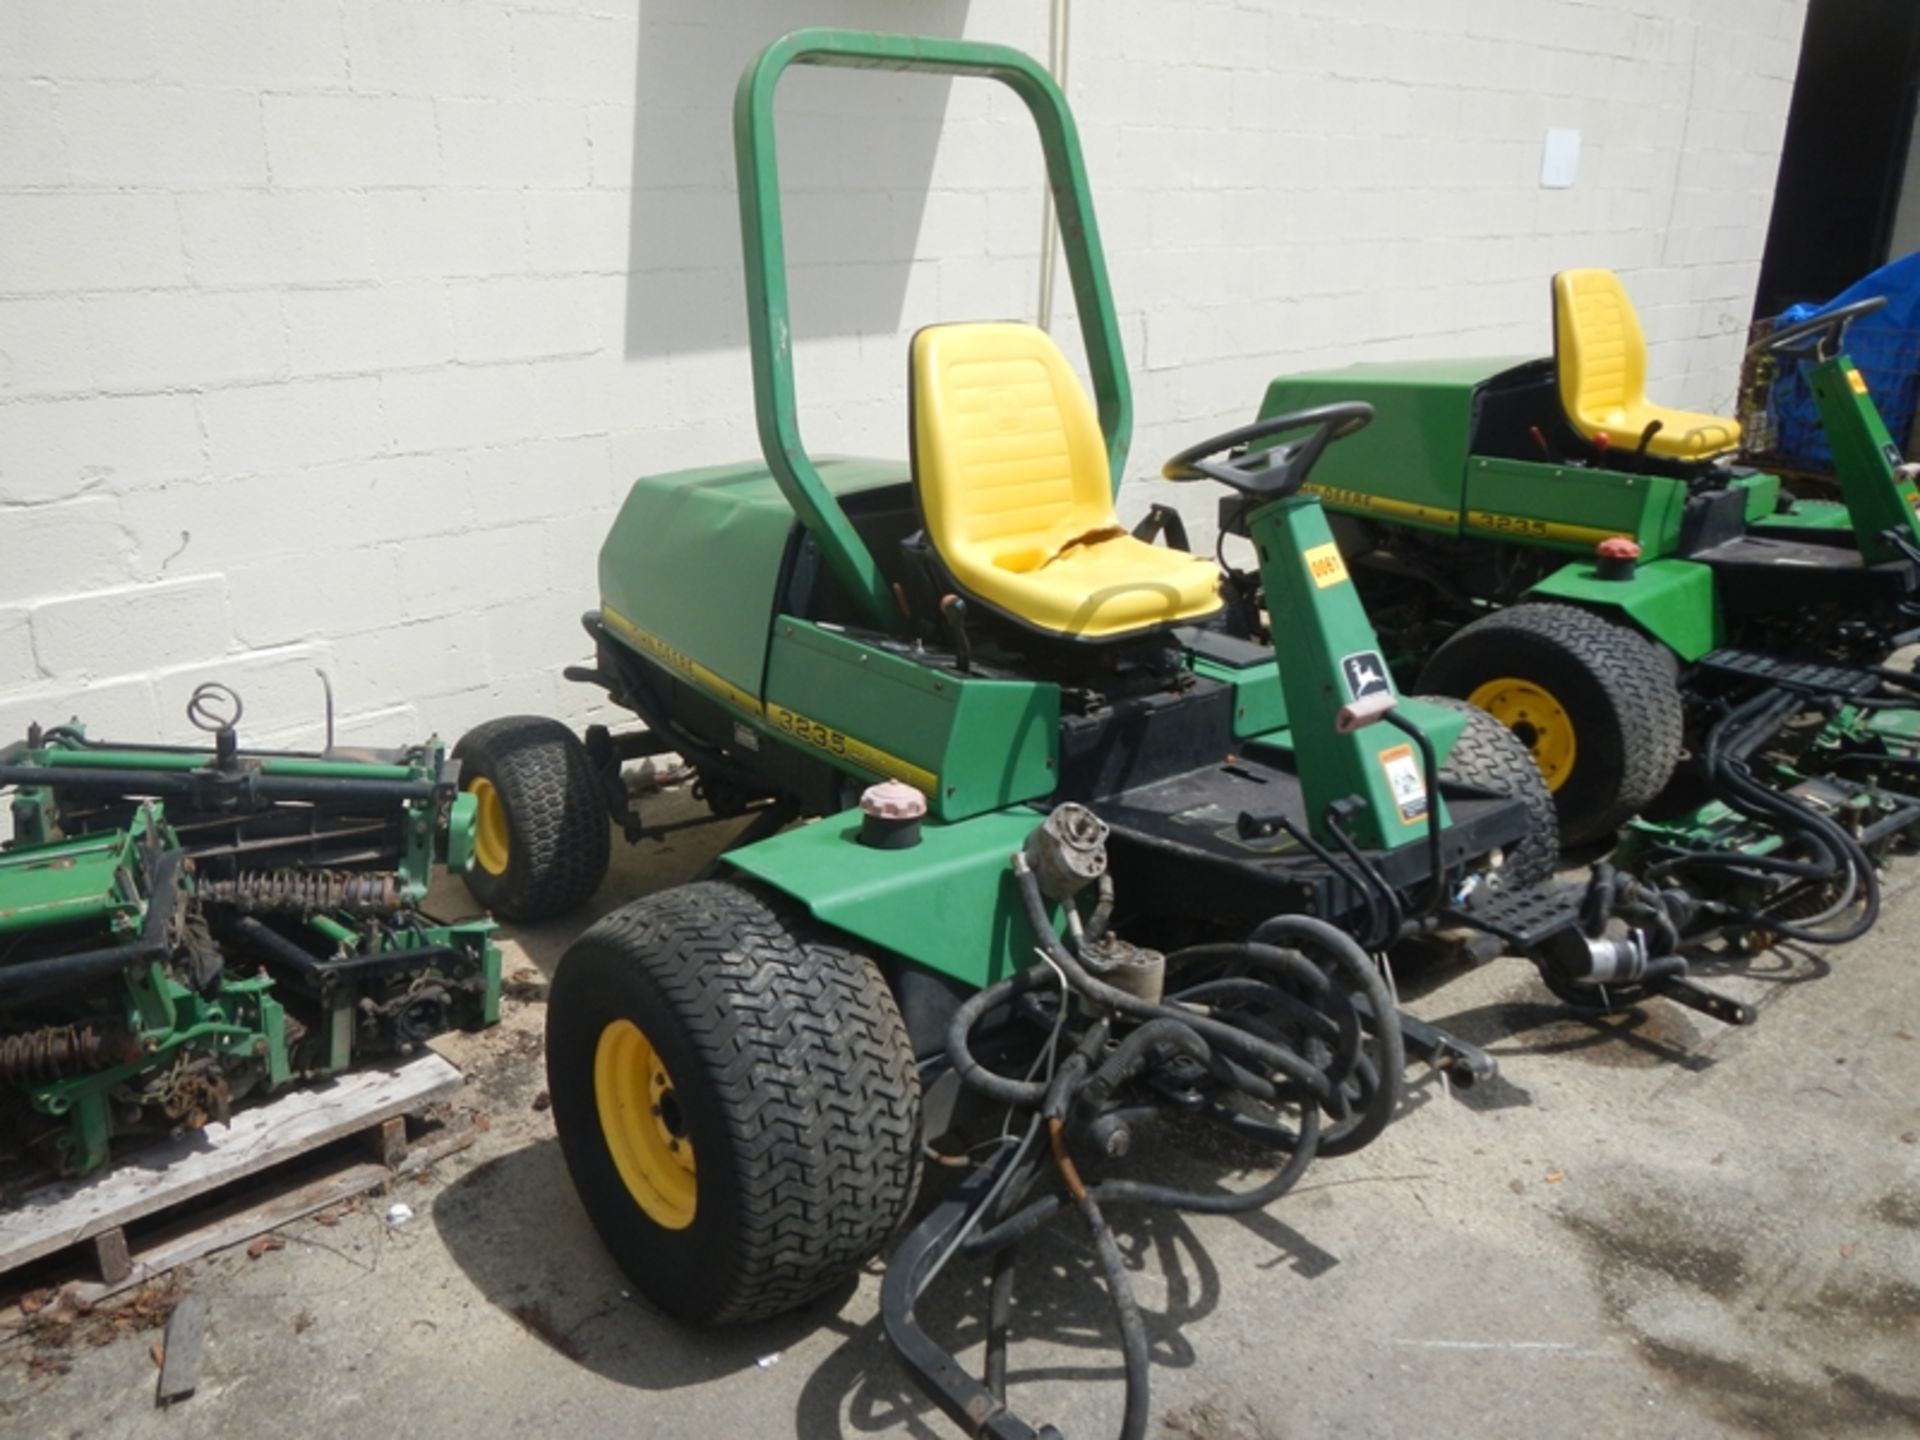 JD 3225 108" reel mower Yanmar dsl Machine cranks and runs but has hydraulic leaks where reels are r - Image 2 of 6